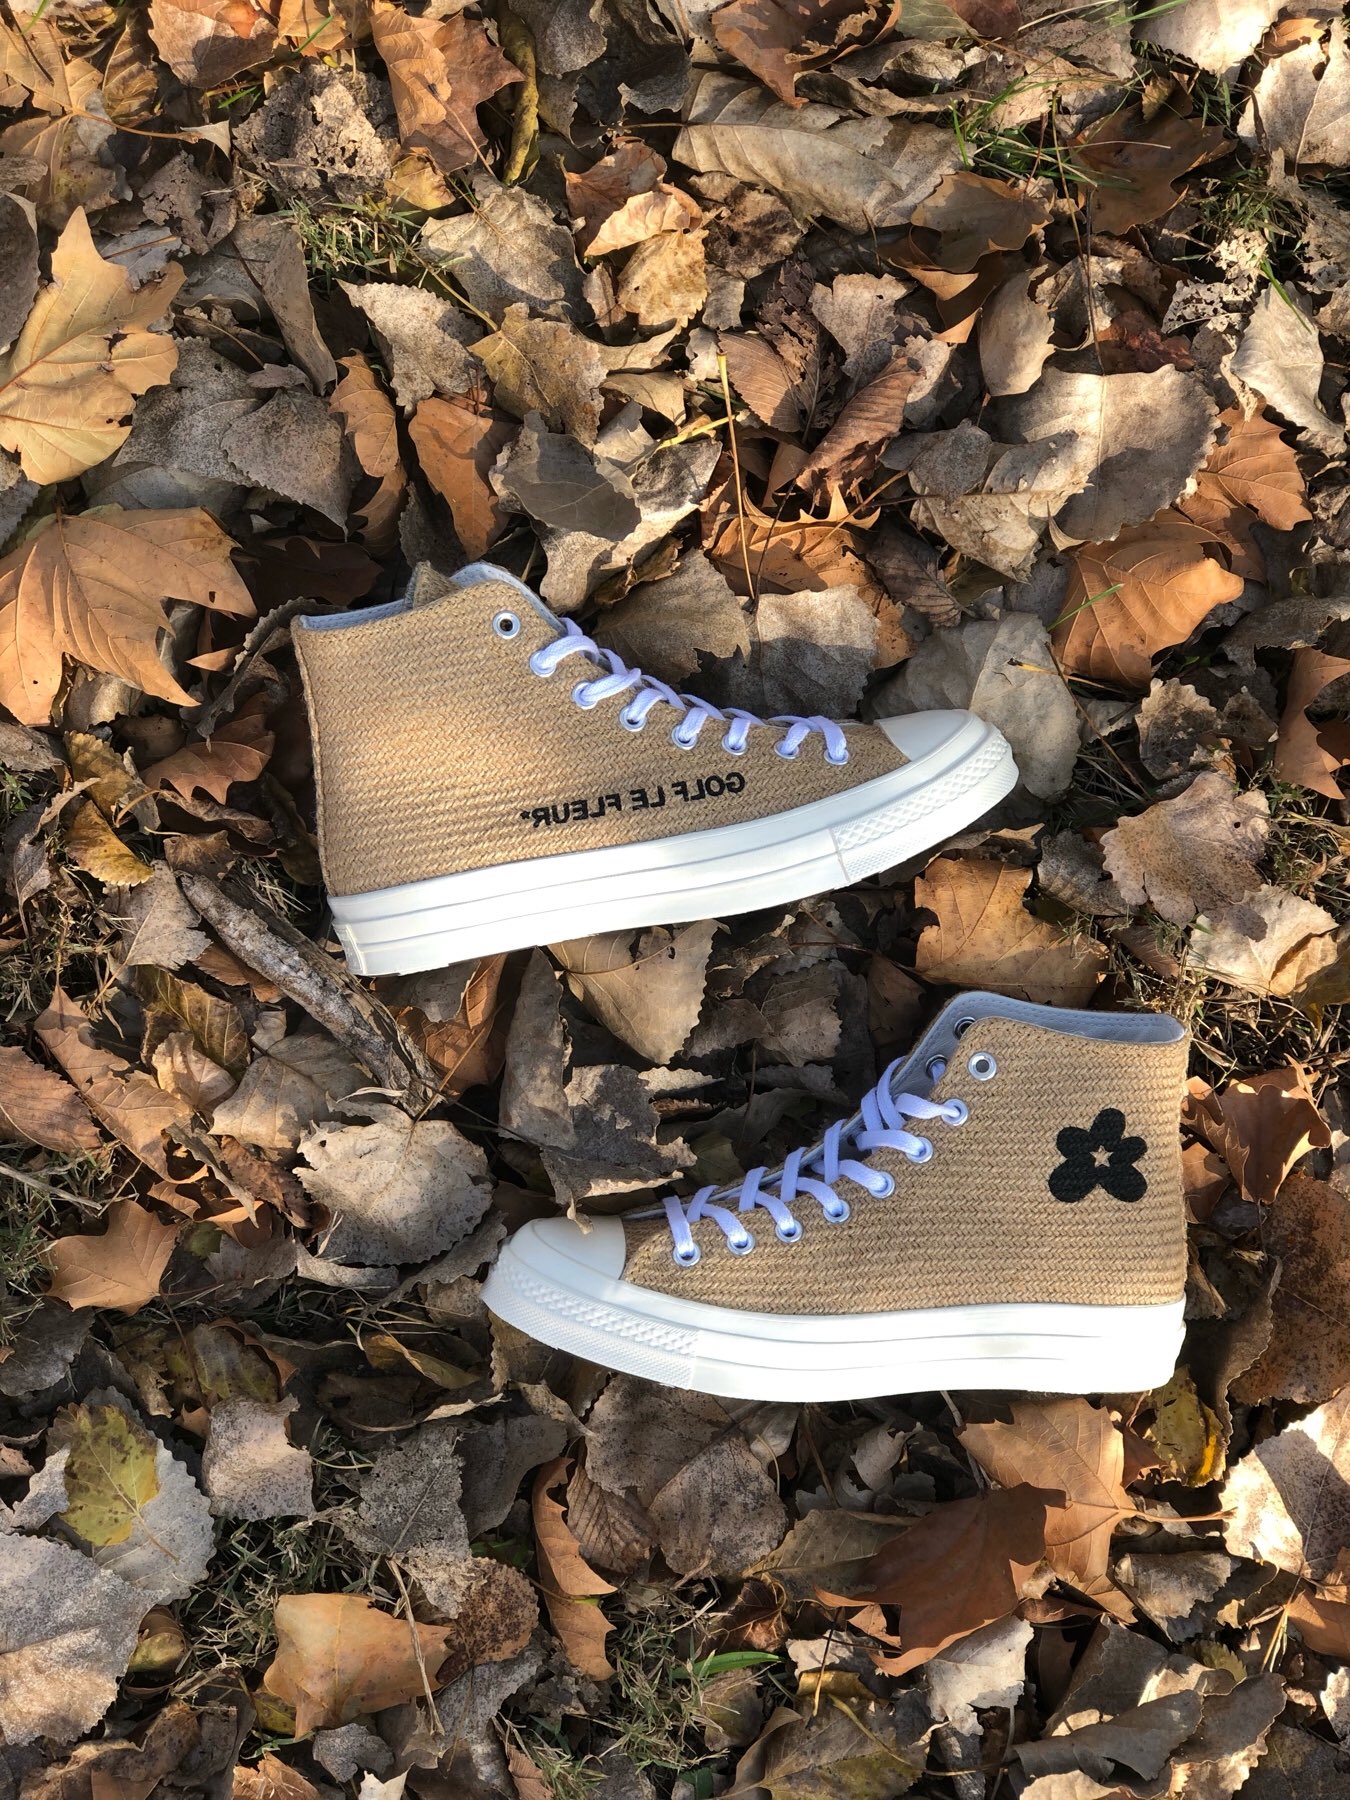 director Interrupción Oeste Jimmy Jazz on Twitter: "The Converse x Golf Le Fleur “Burlap” collection  just dropped on https://t.co/hFfqOh3Wmk and these 3 store locations ONLY:⠀⠀  #HARLEM 239 W 125th st, NY, NY⠀⠀ #BROOKLYN 520 Fulton